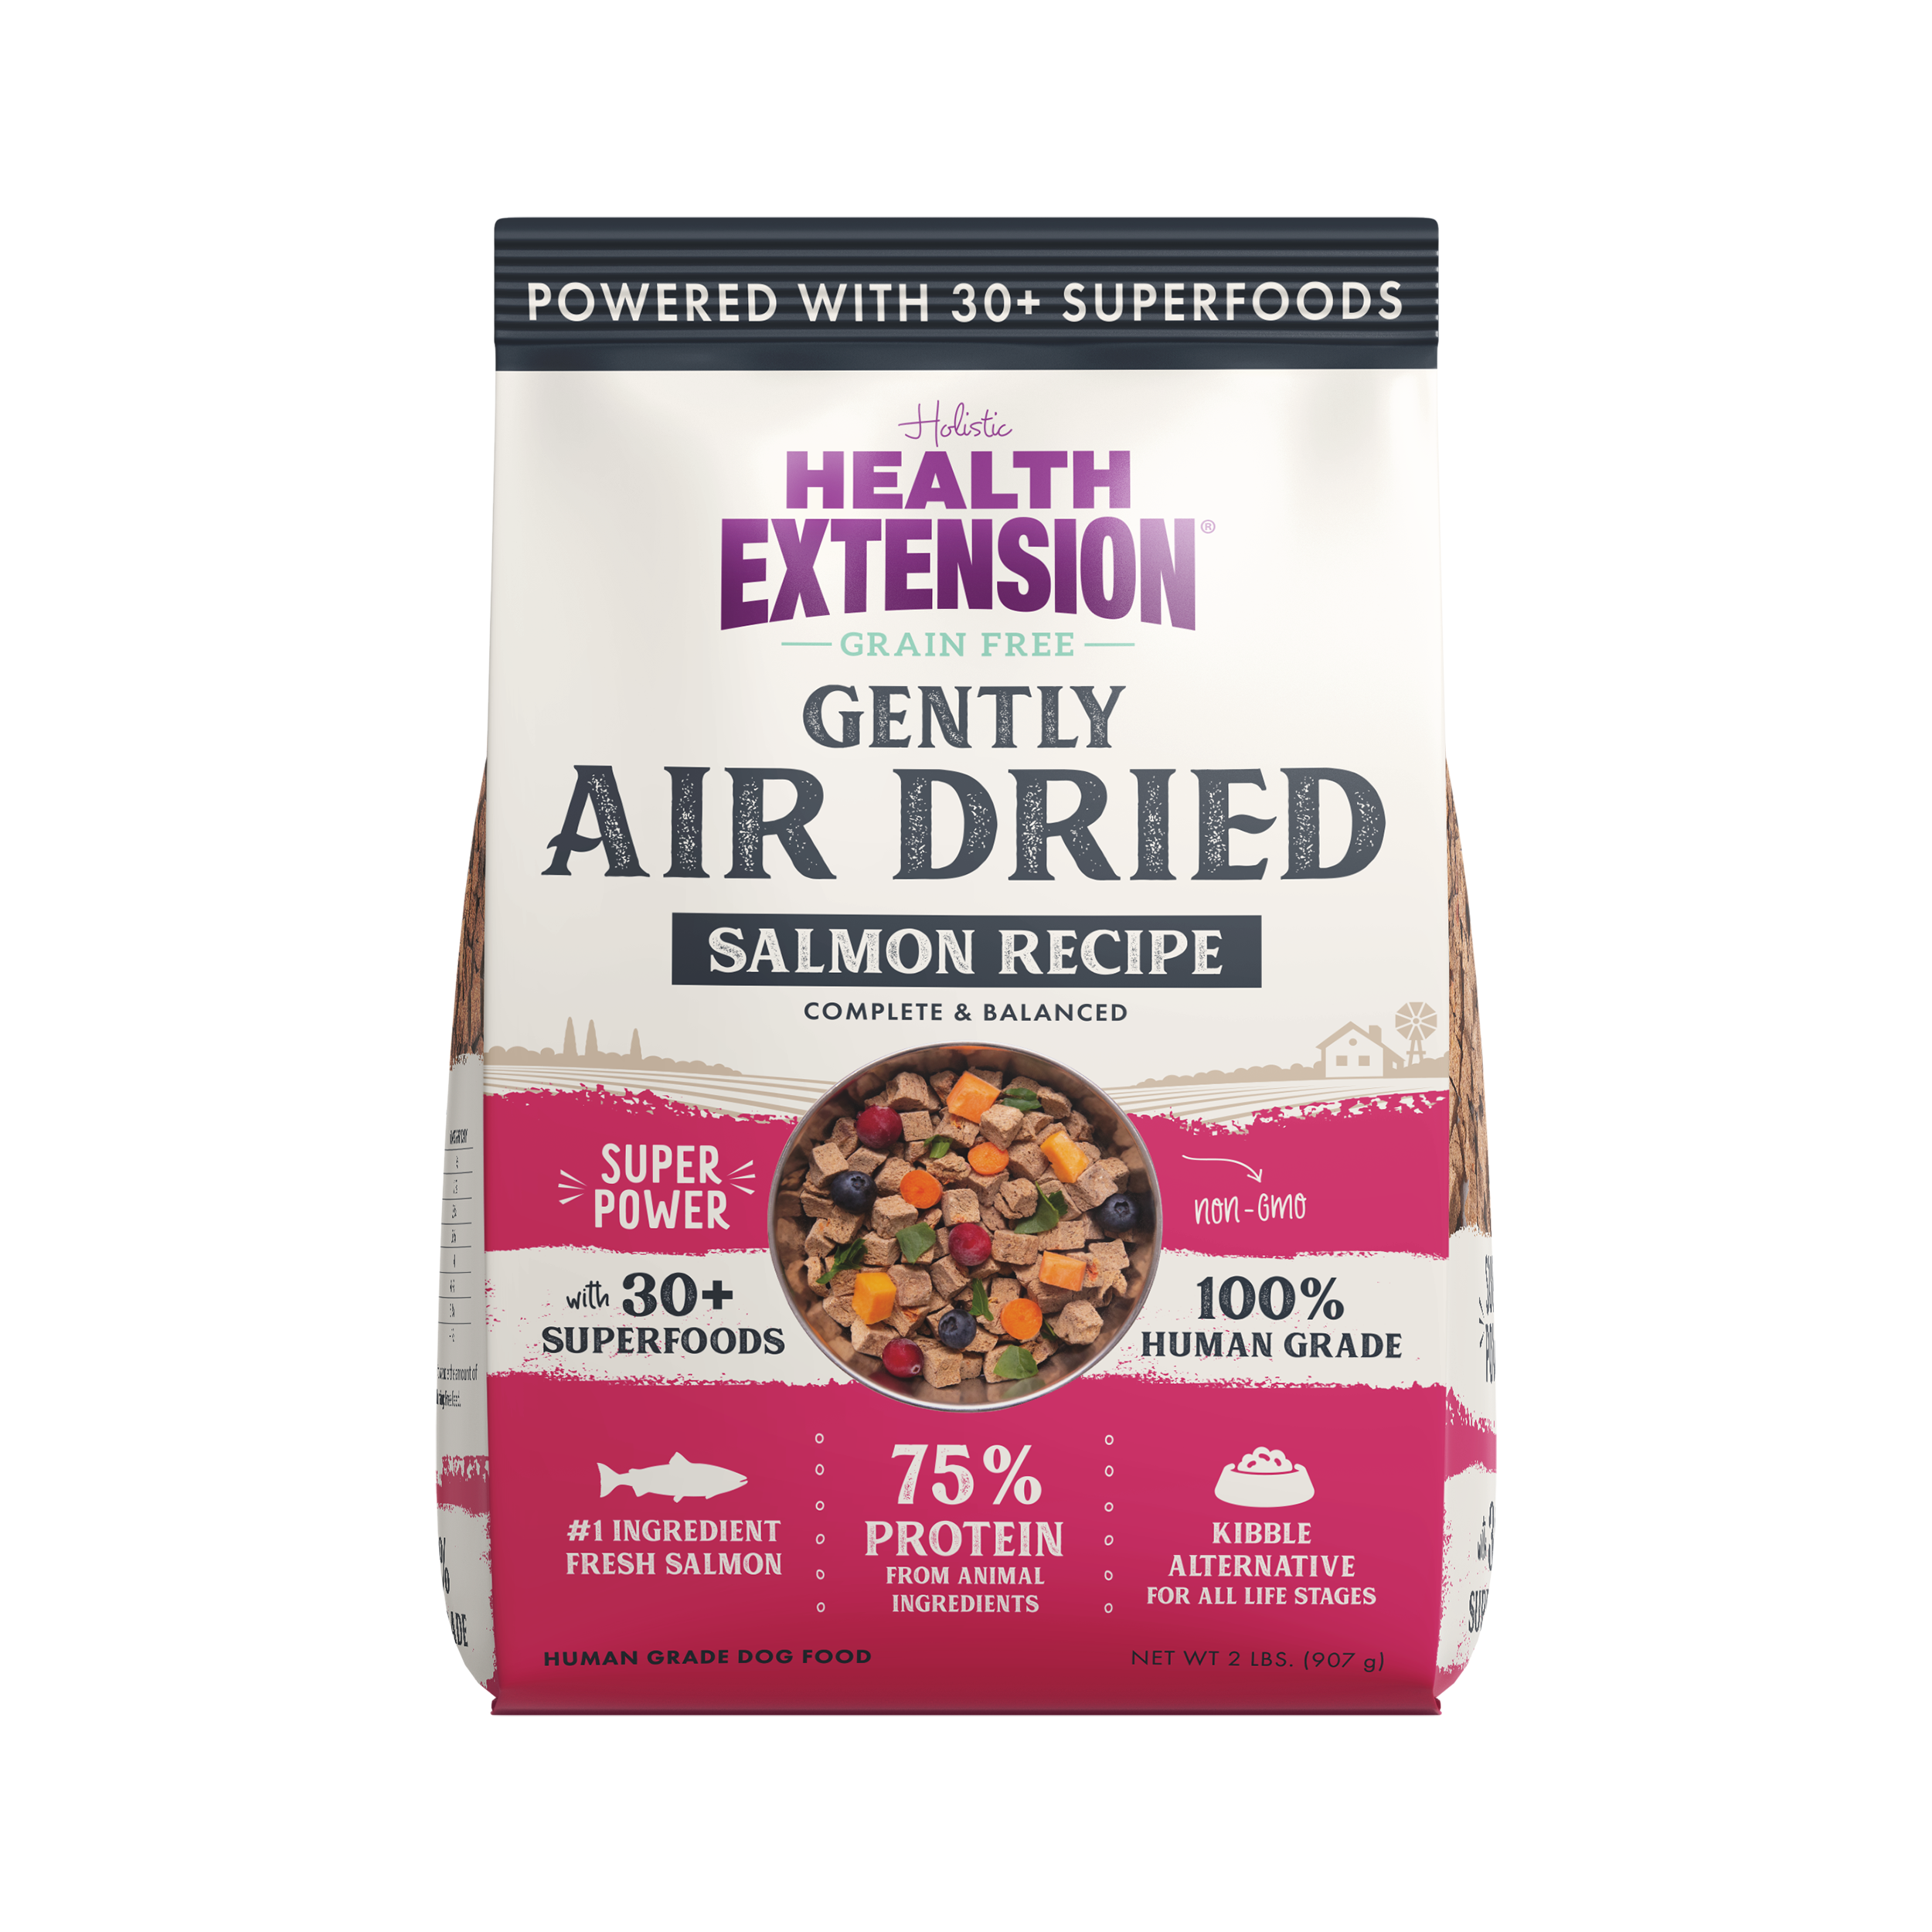 Health Extension Grain Free Gently Air Dried Salmon Recipe dog food packaging, highlighting 75% protein from animal ingredients, powered with over 30 superfoods, and 100% human grade.